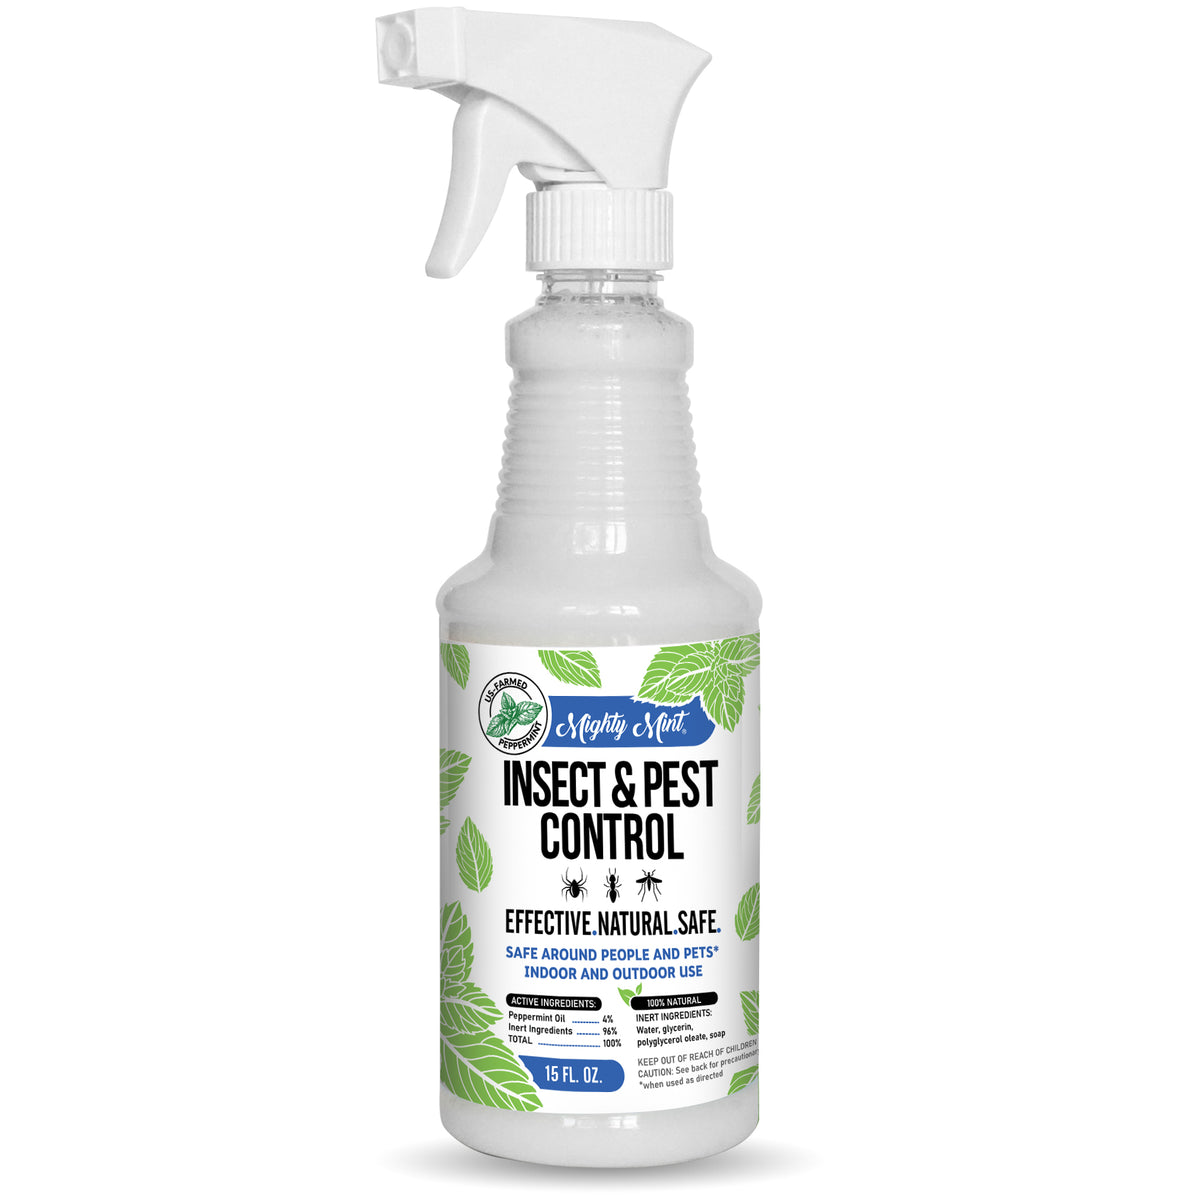 Mighty Mint Insect &amp; Pest Control - 15oz Natural Peppermint Oil Spray for Spiders, Ants, and More - STANDALONE UNIT